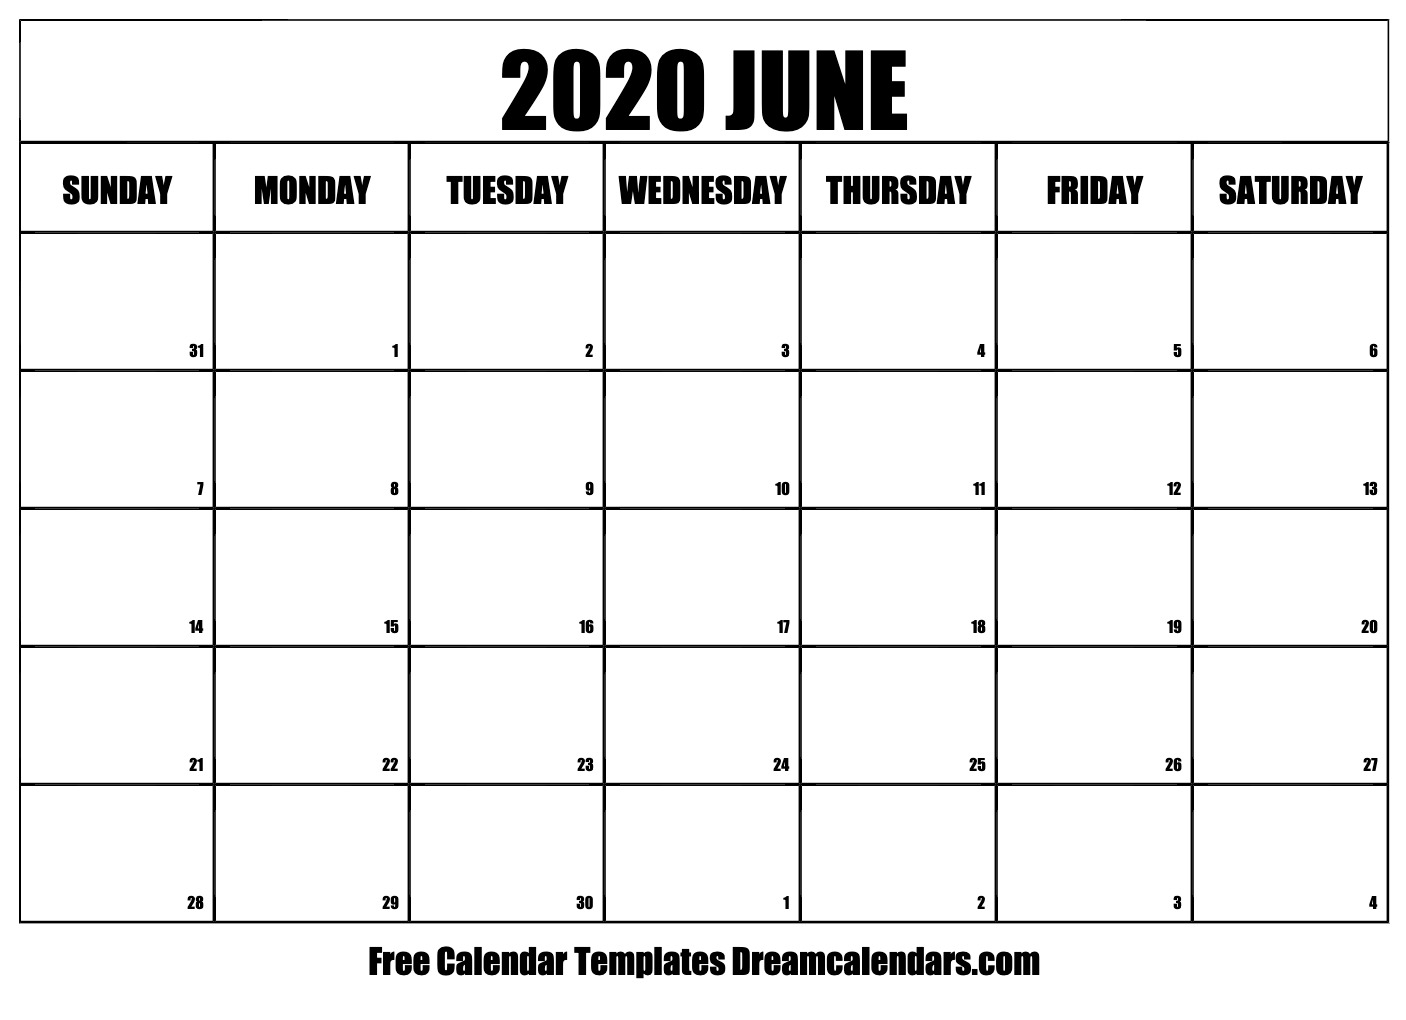 June 2020 Calendar Free Printable With Holidays And Observances 7664